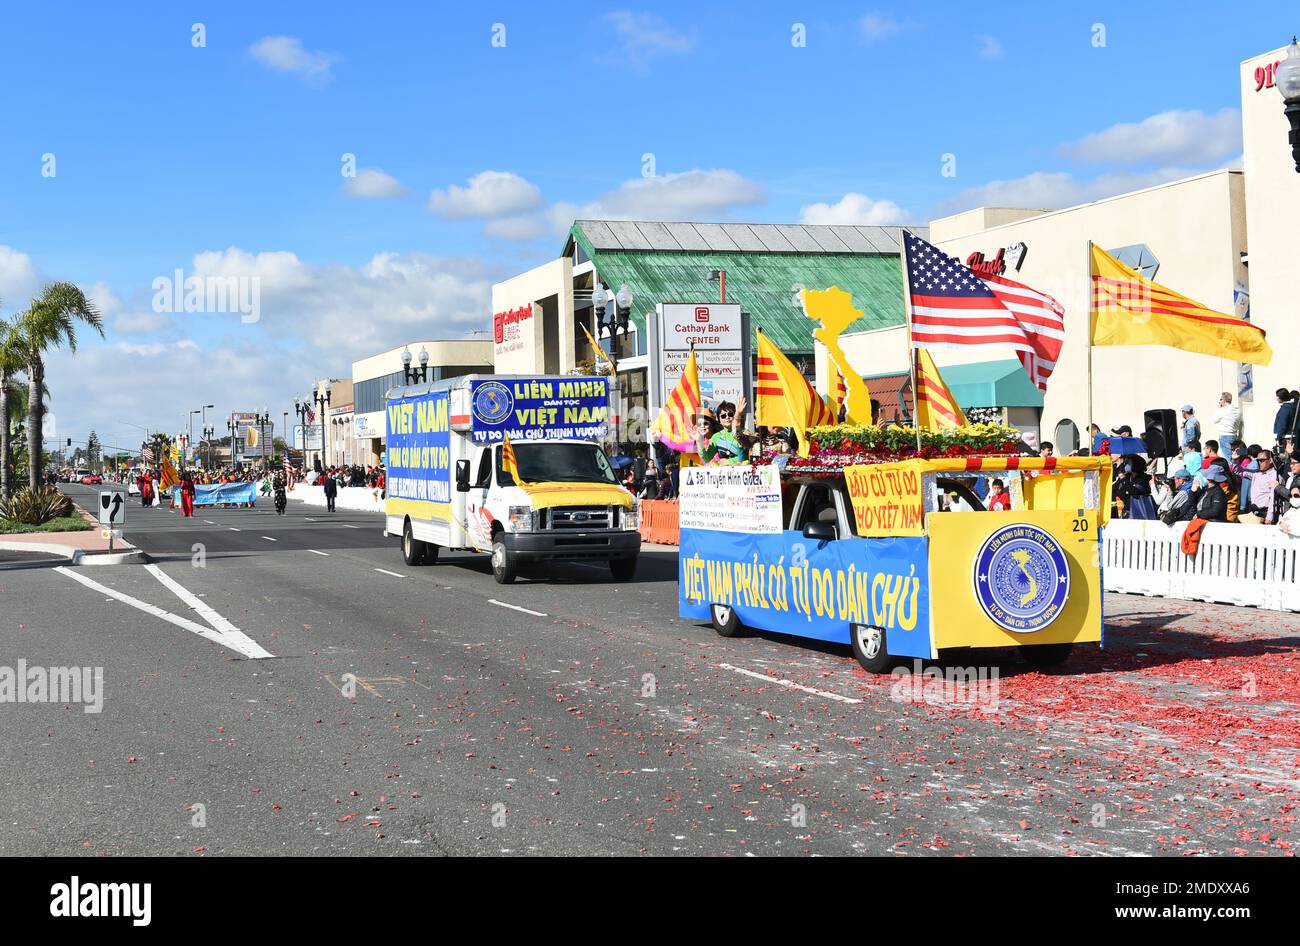 WESTMINSTER, CALIFORNIA - 22 JAN 2023:  Free Elections for Viet Nam banners on vehicle at the Tet Parade Celebrating the Year of the Cat. Stock Photo